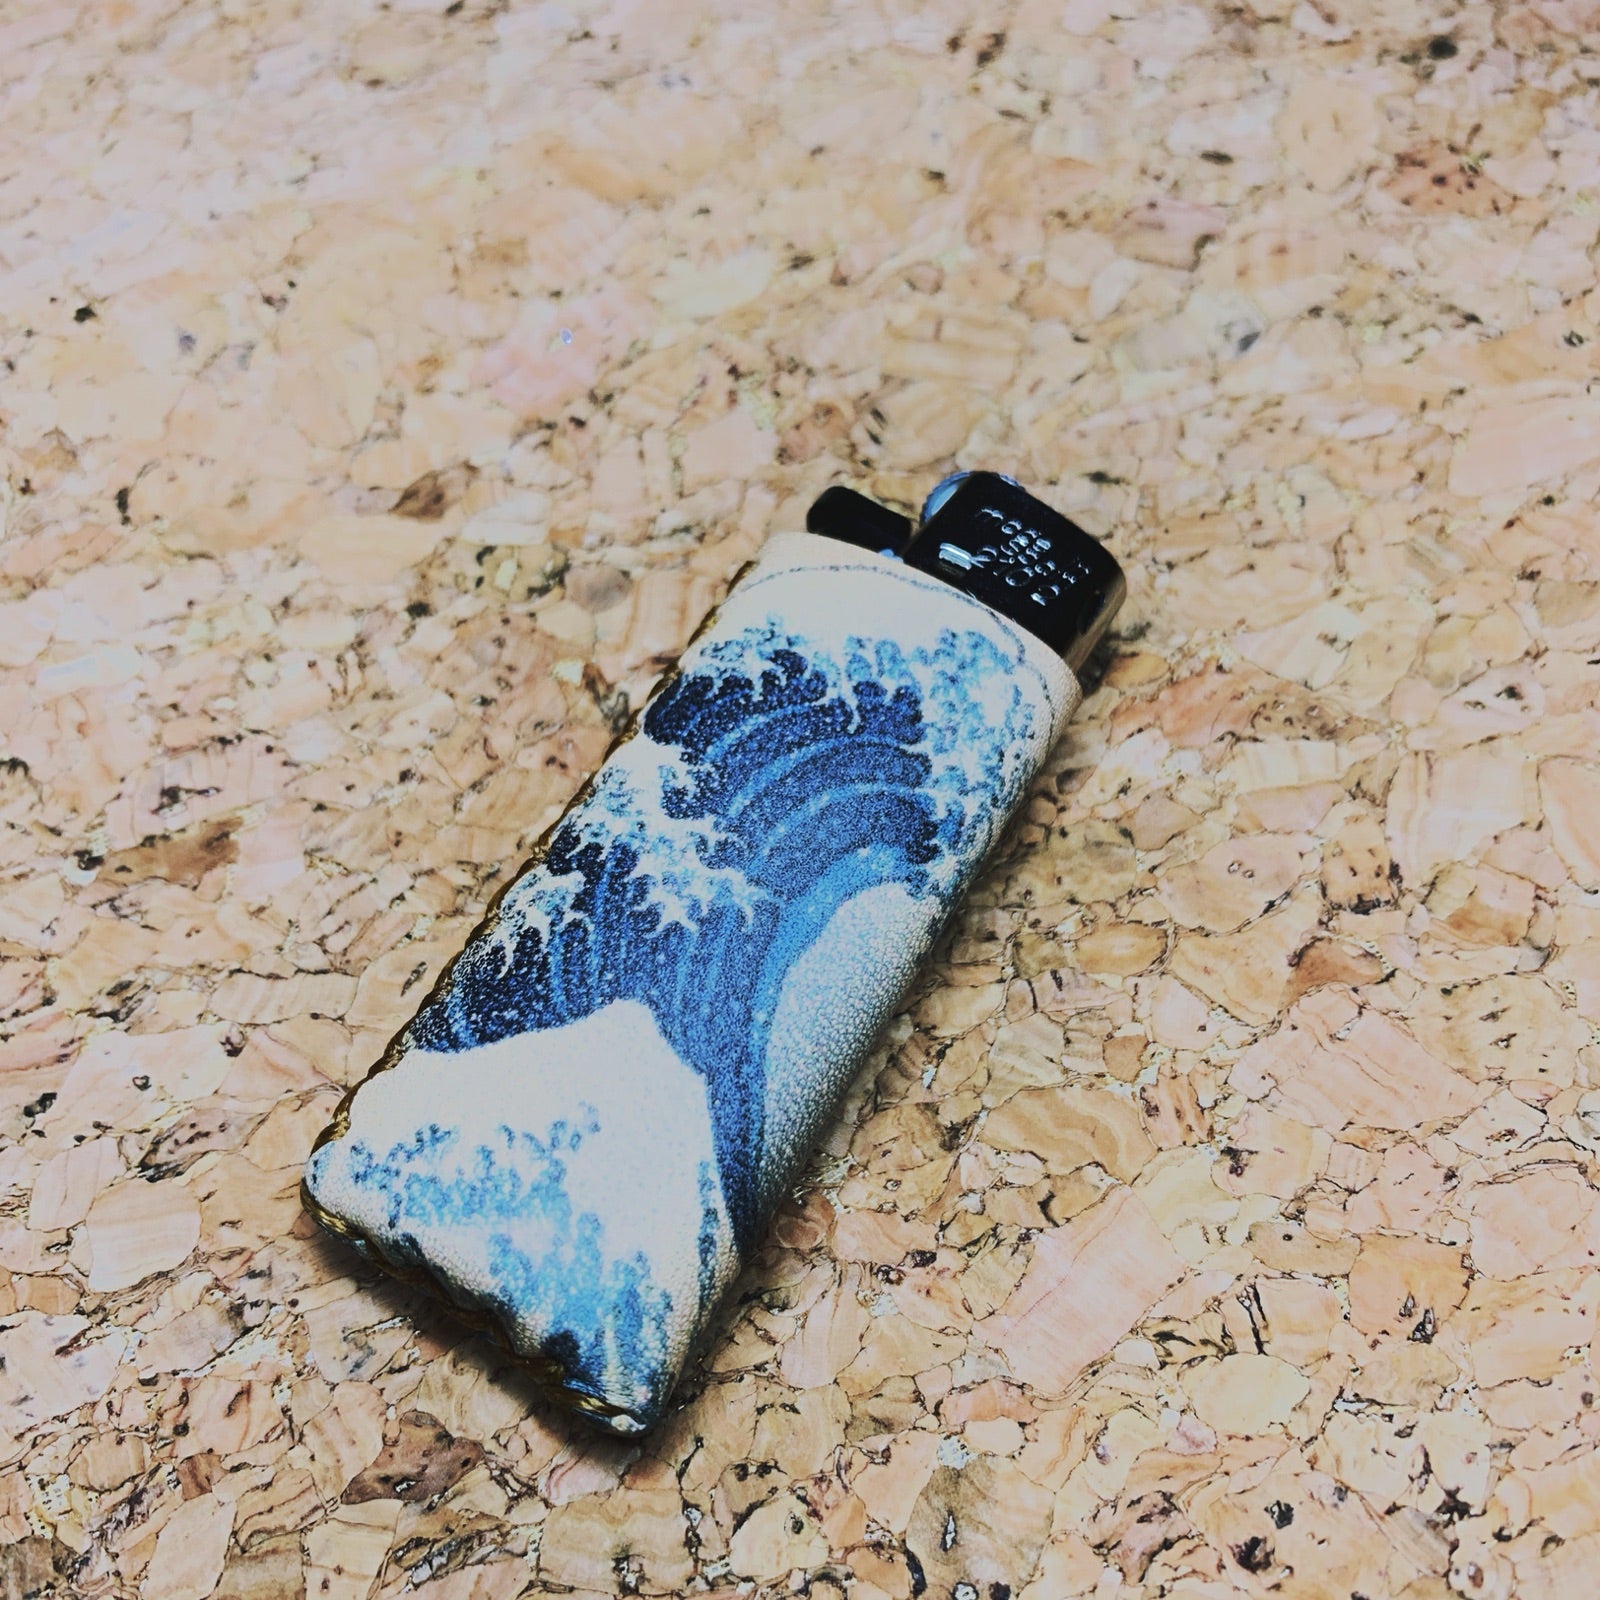 Bic Leather Lighter Case The Great Wave of Kanagawa Leather Bic Lighter Holder Leather Bic Lighter Covers For Men - iwalletsmen